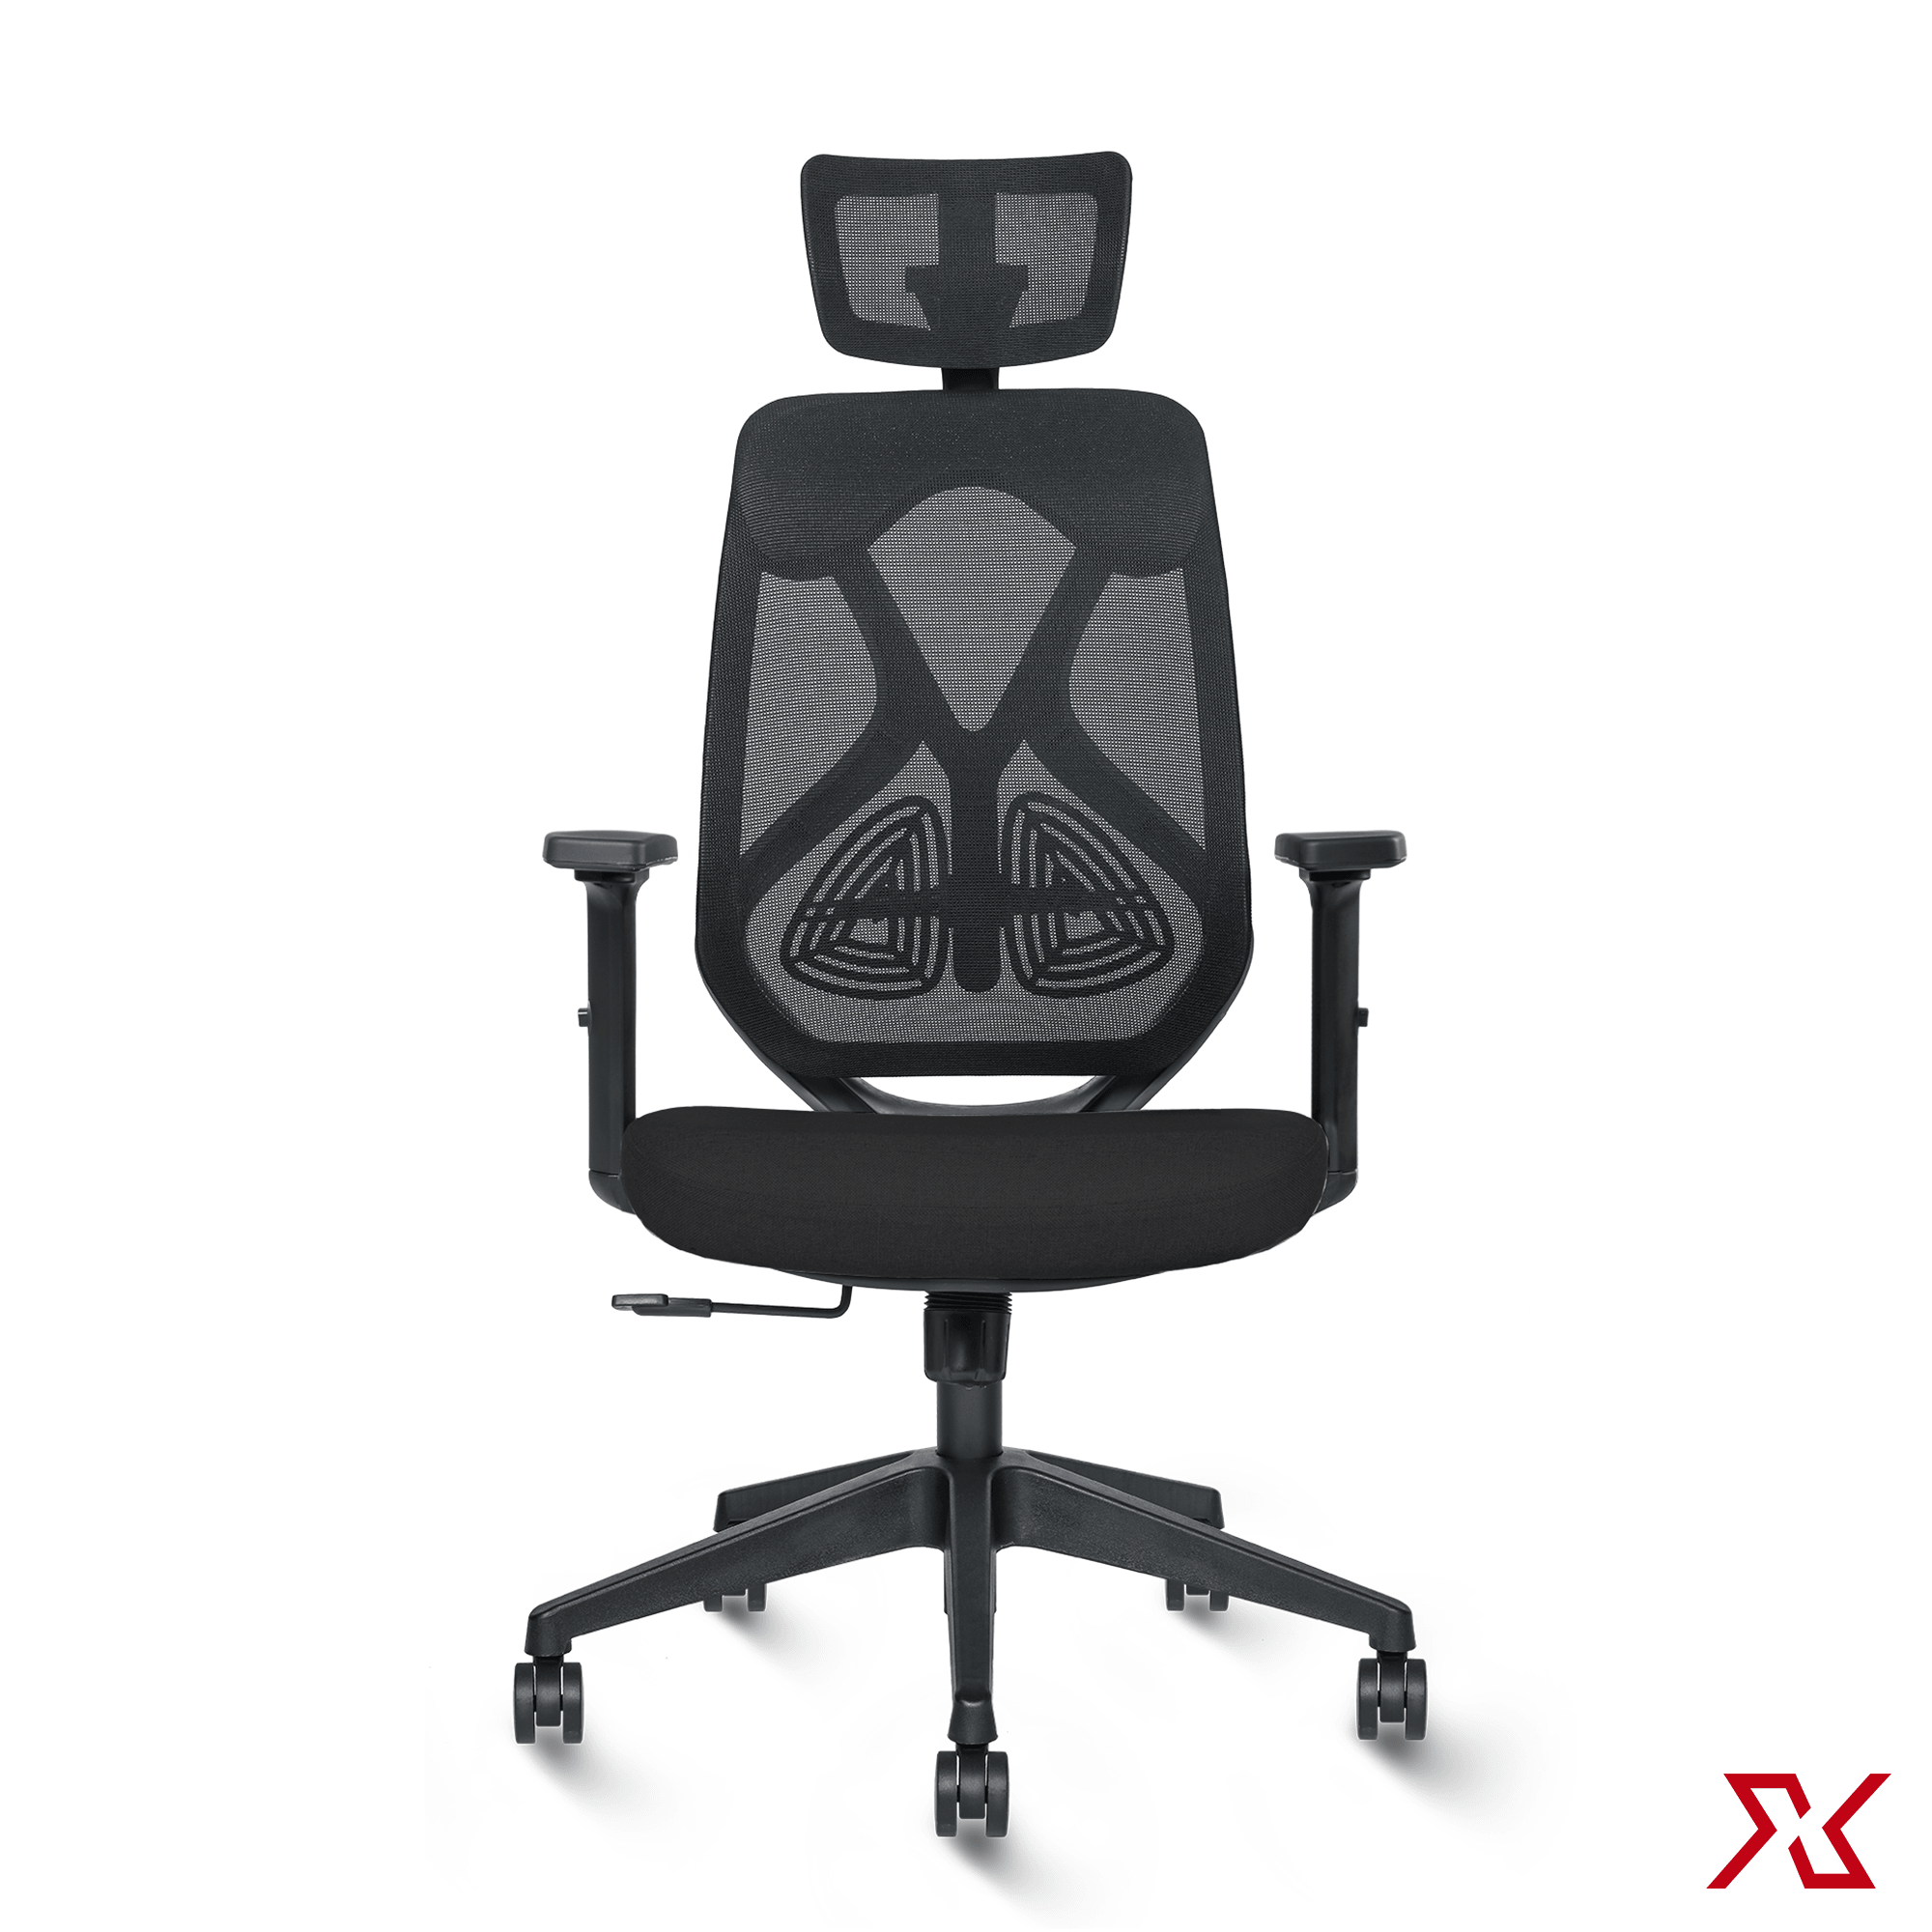 ZEN High Back LX (Black Chair) - Exclusiff Seating Sytems